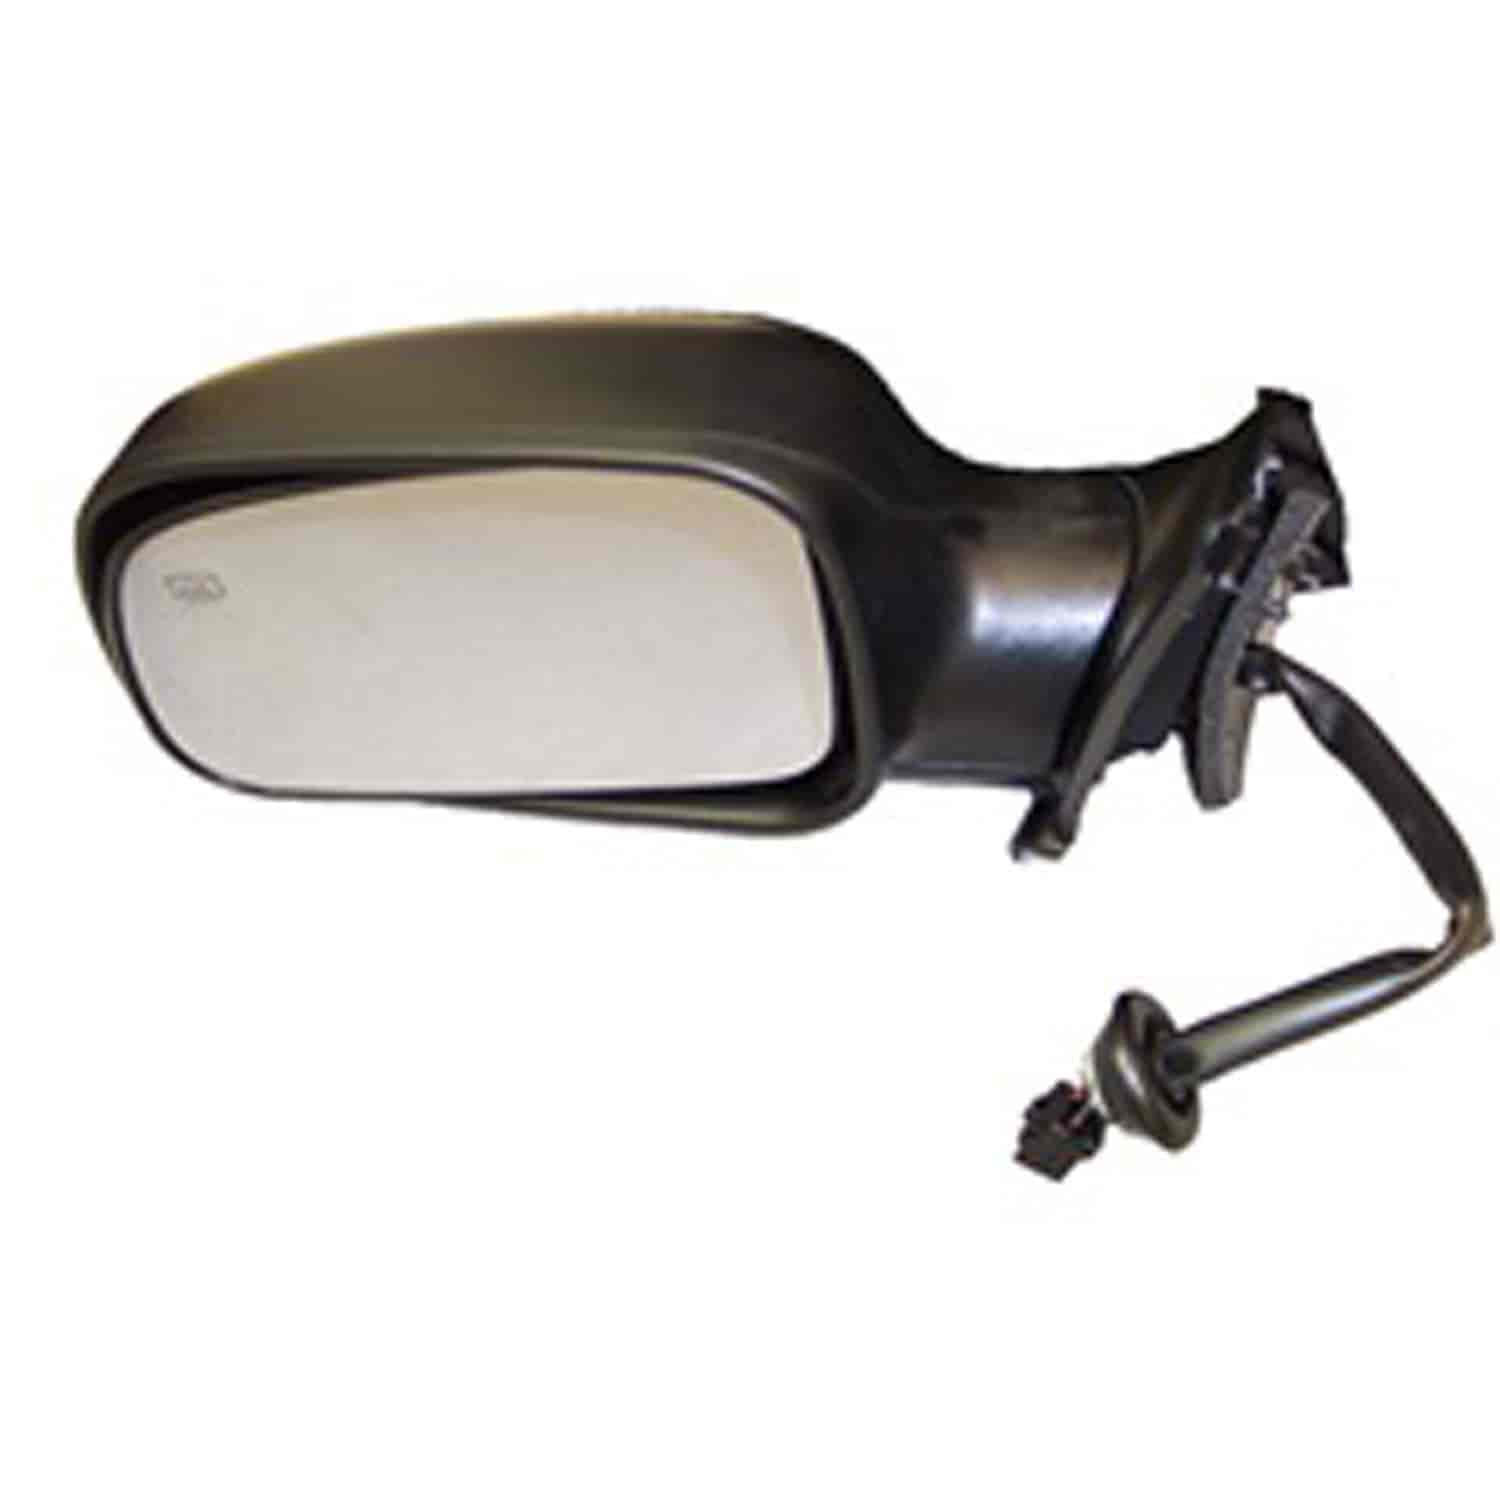 This black folding power door mirror from Omix-ADA is heated and fits the left door on 99-04 Jeep Grand Cherokee WJ.